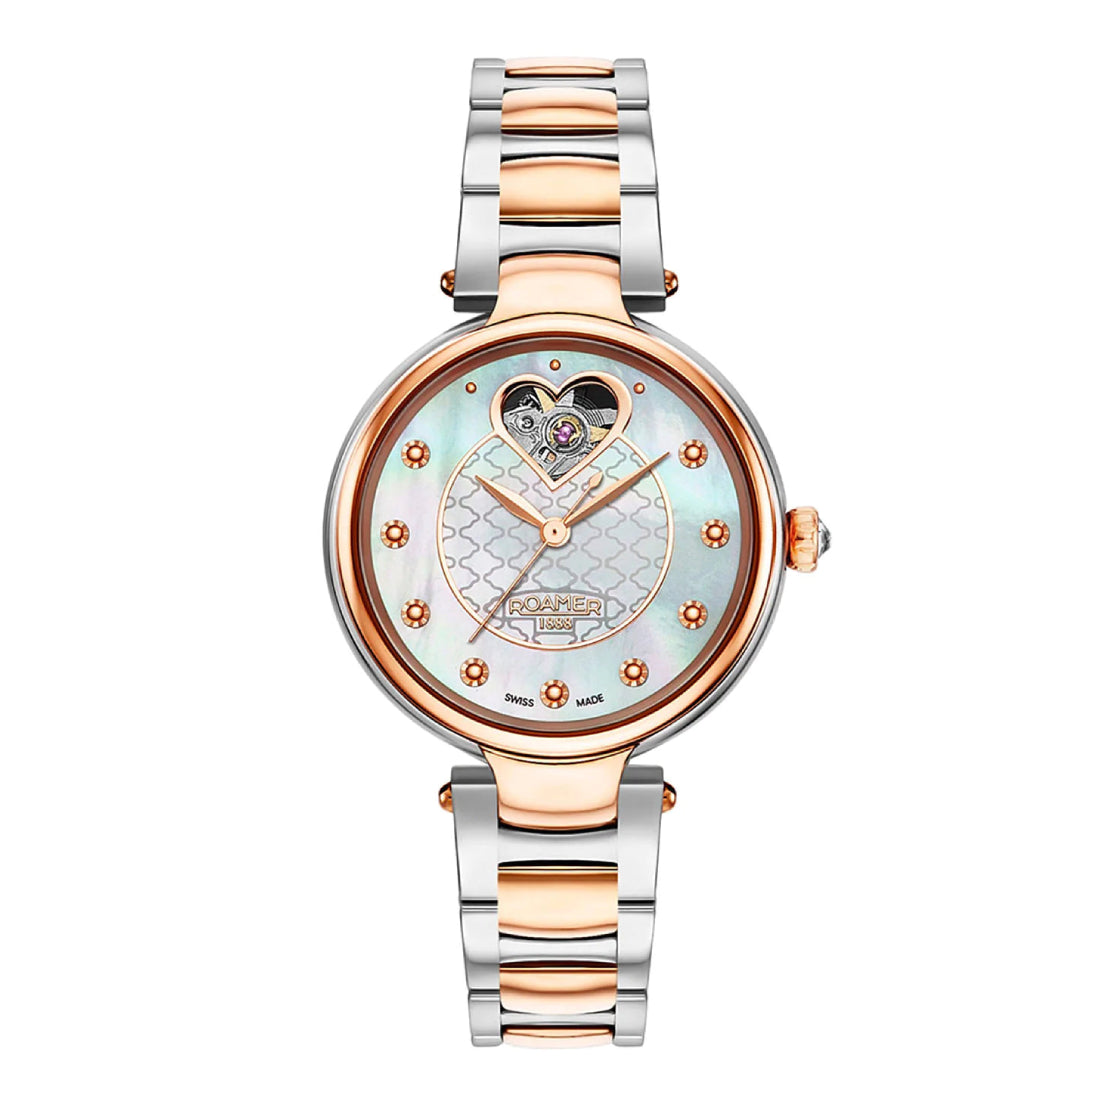 Romer Ladies Automatic Movement White Dial Watch - ROA-0087